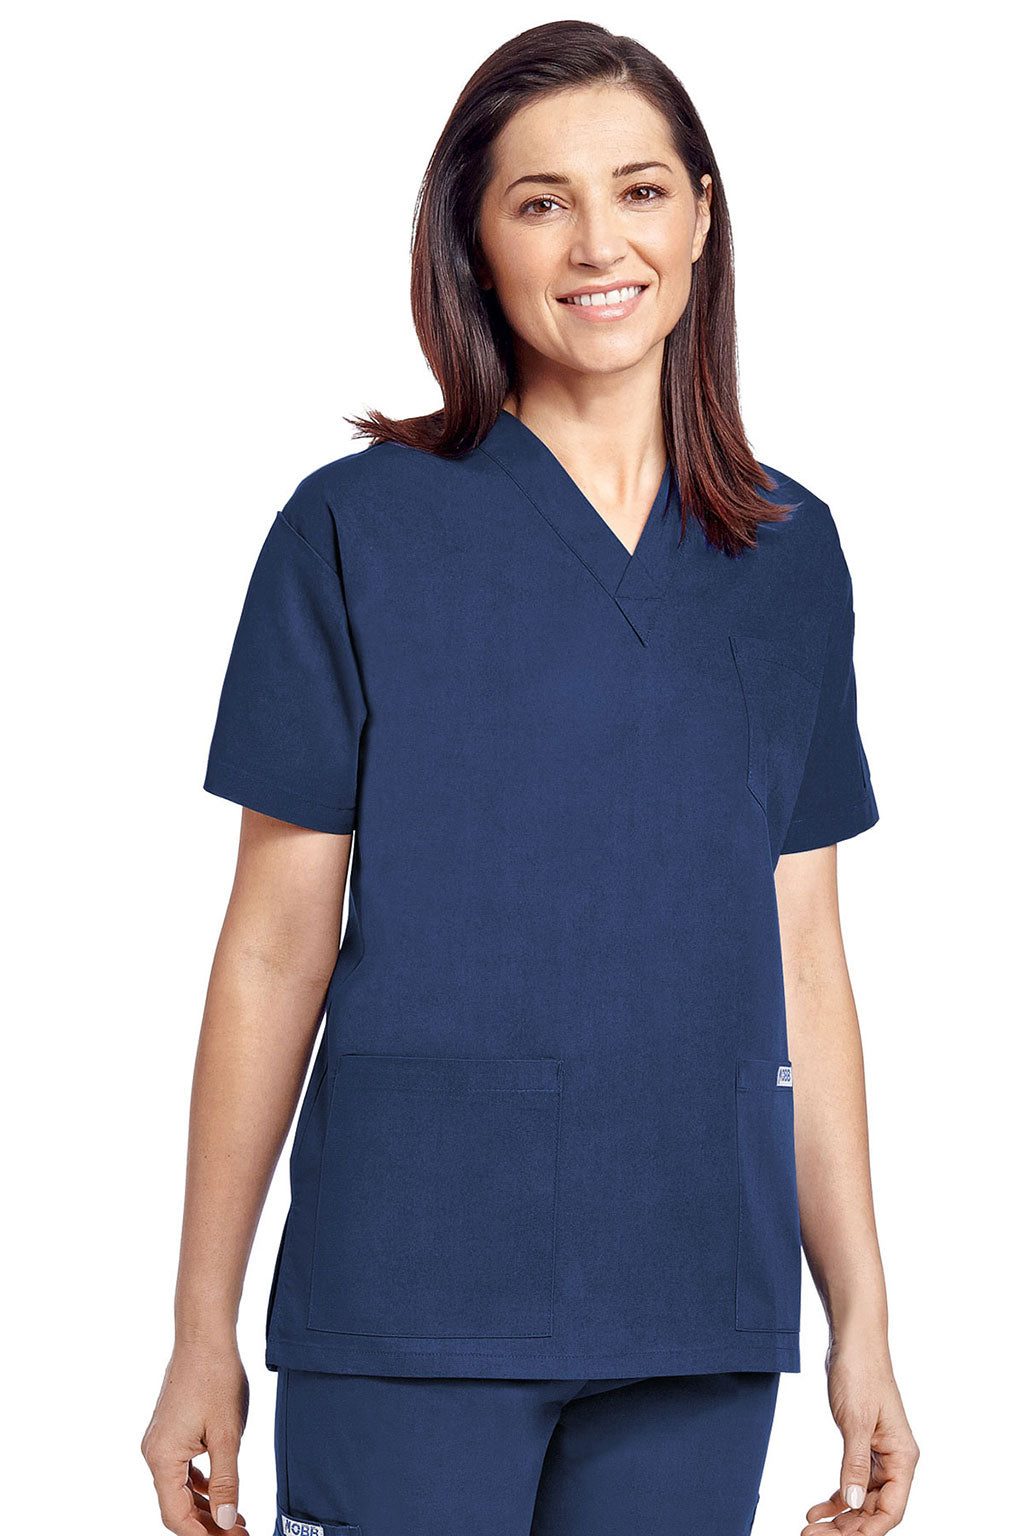 Product - Clearance Unisex V-Neck Mobb Scrub Top by MOBB